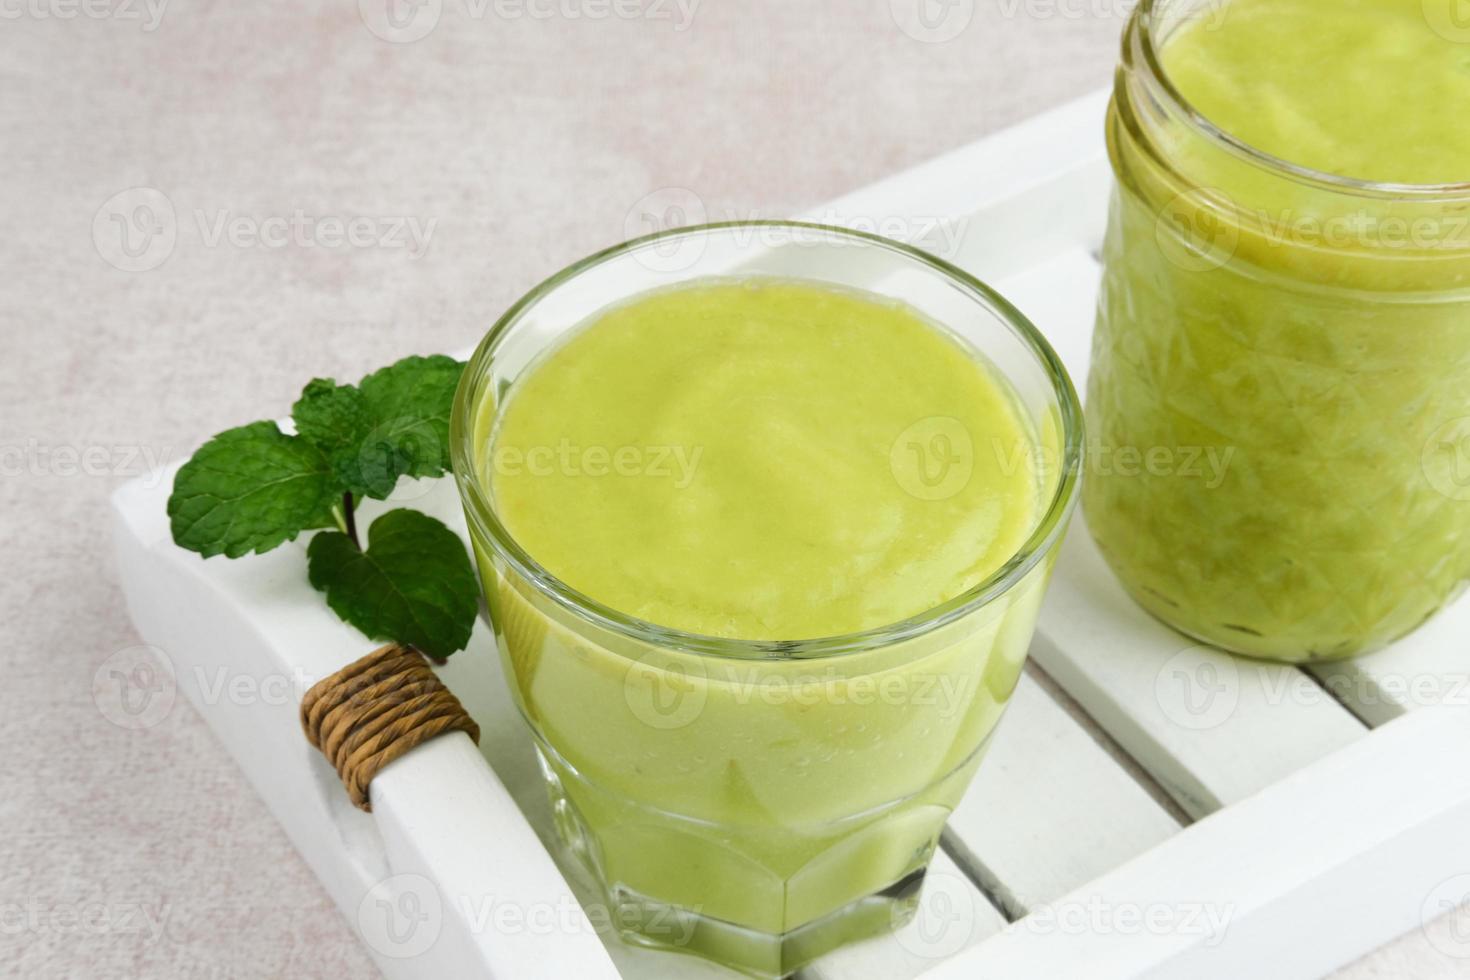 Jus Alpukat or Avocado Juice. Vegan diet and nutrition, healthy concepts drinks. photo